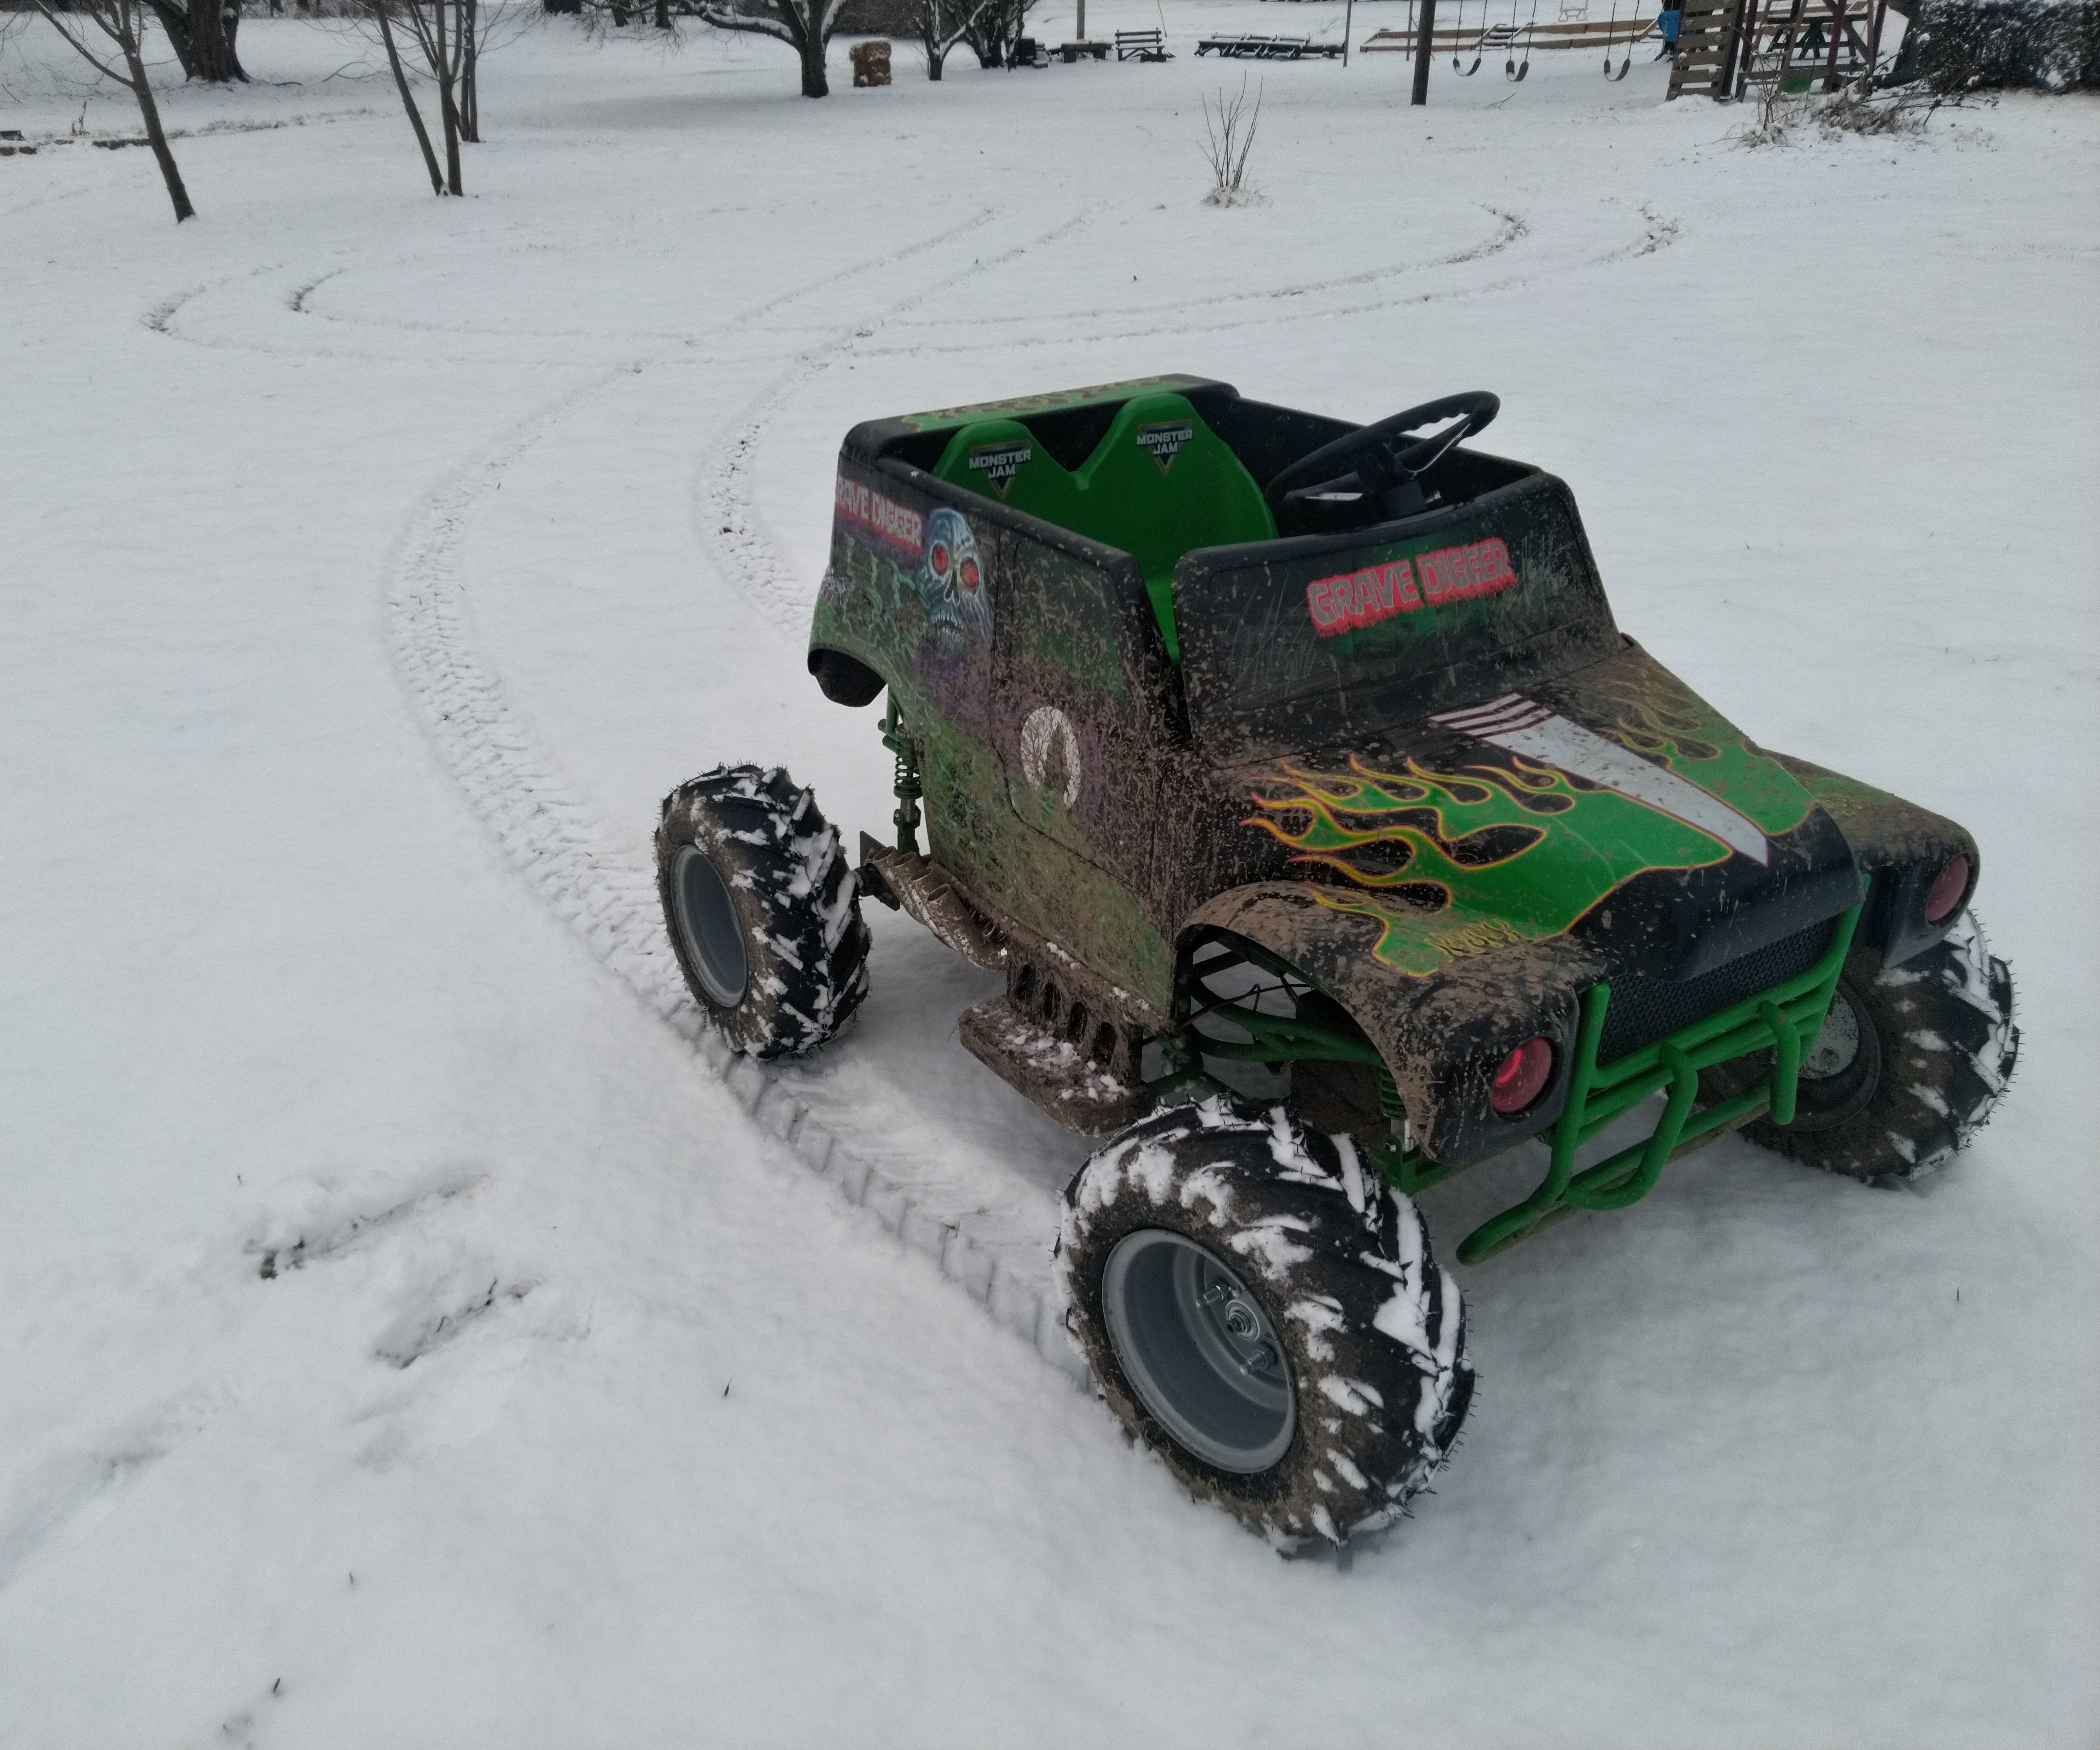 Converting 24v Grave Digger Power Wheels Into an Electric Go-kart With Rubber Tires